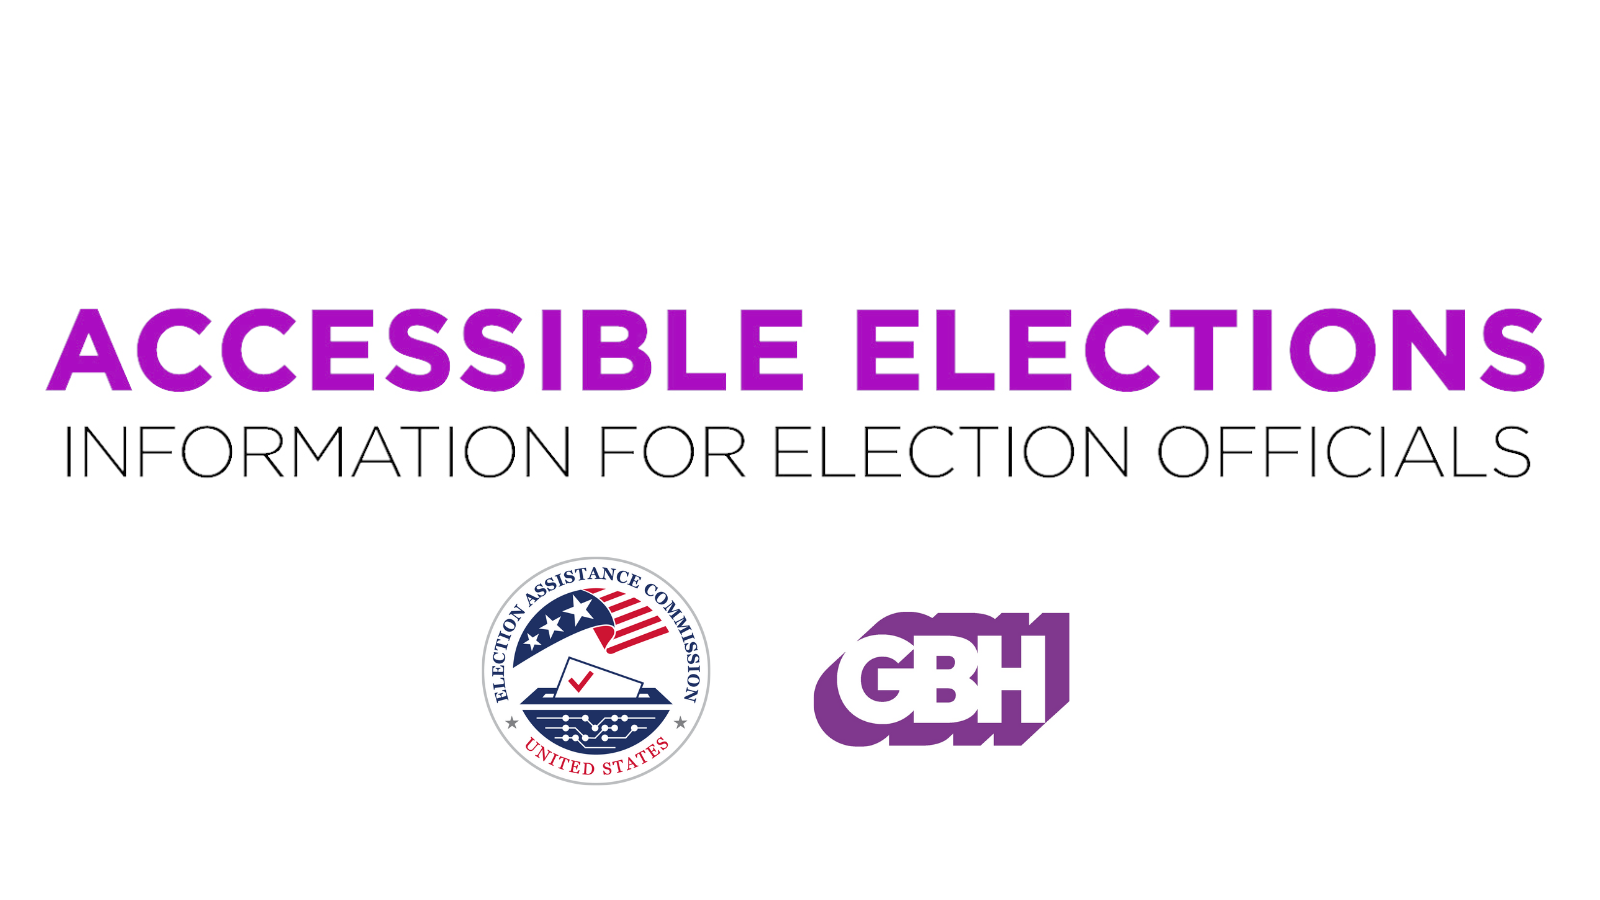 EAC and GBH logos. "Accessible Elections: Information for Election Officials."